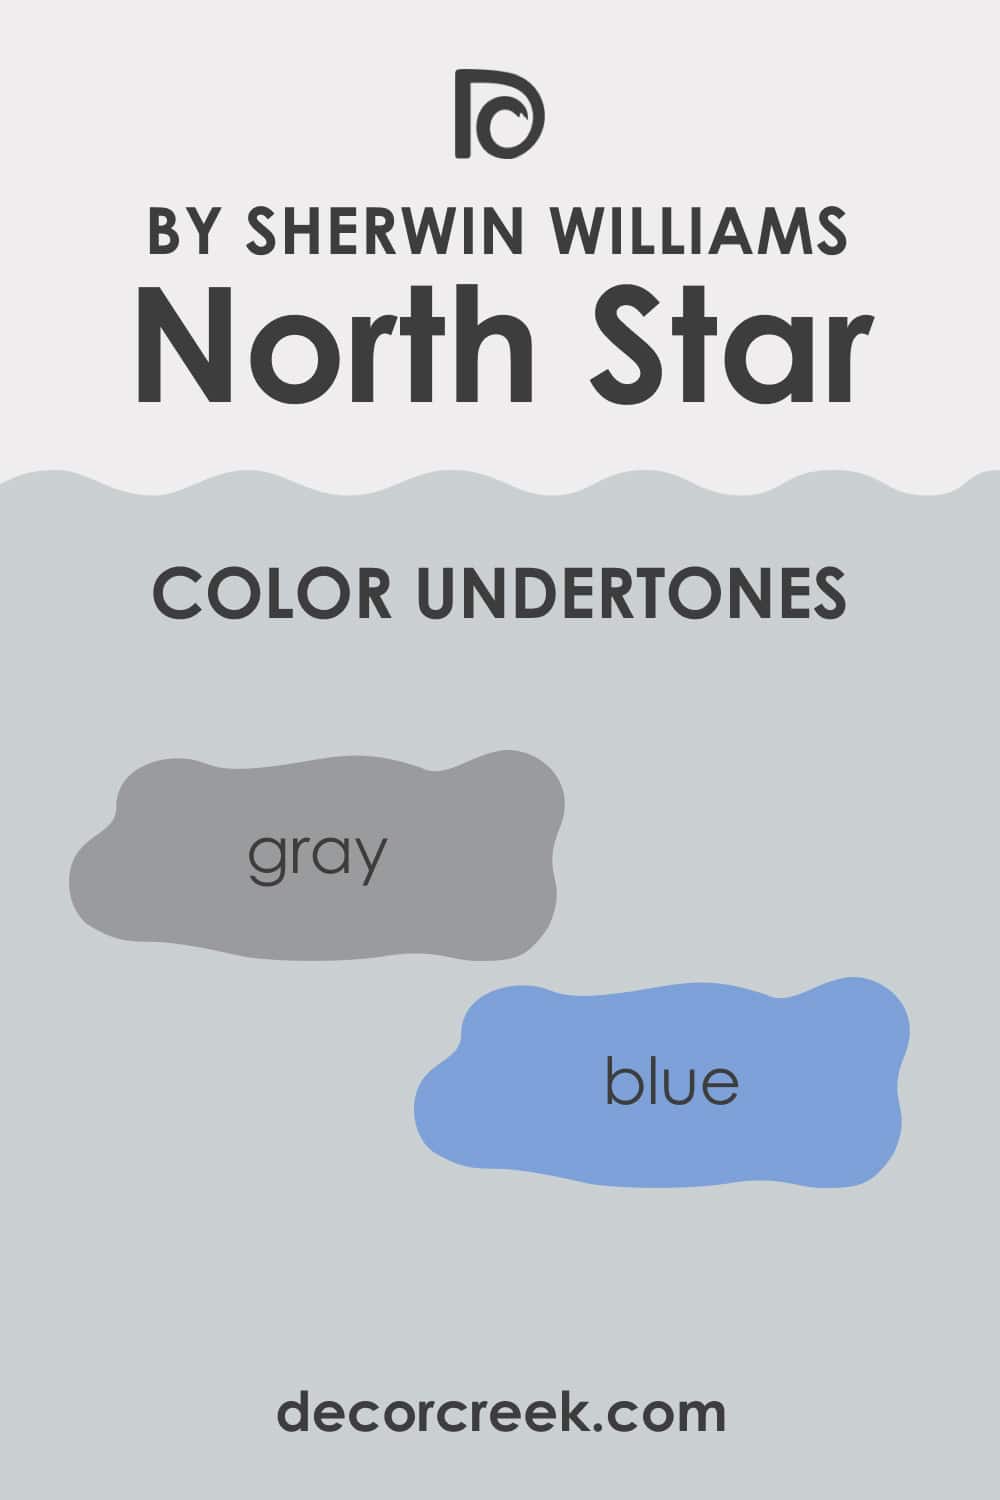 What Undertones Does SW North Star Color Have?